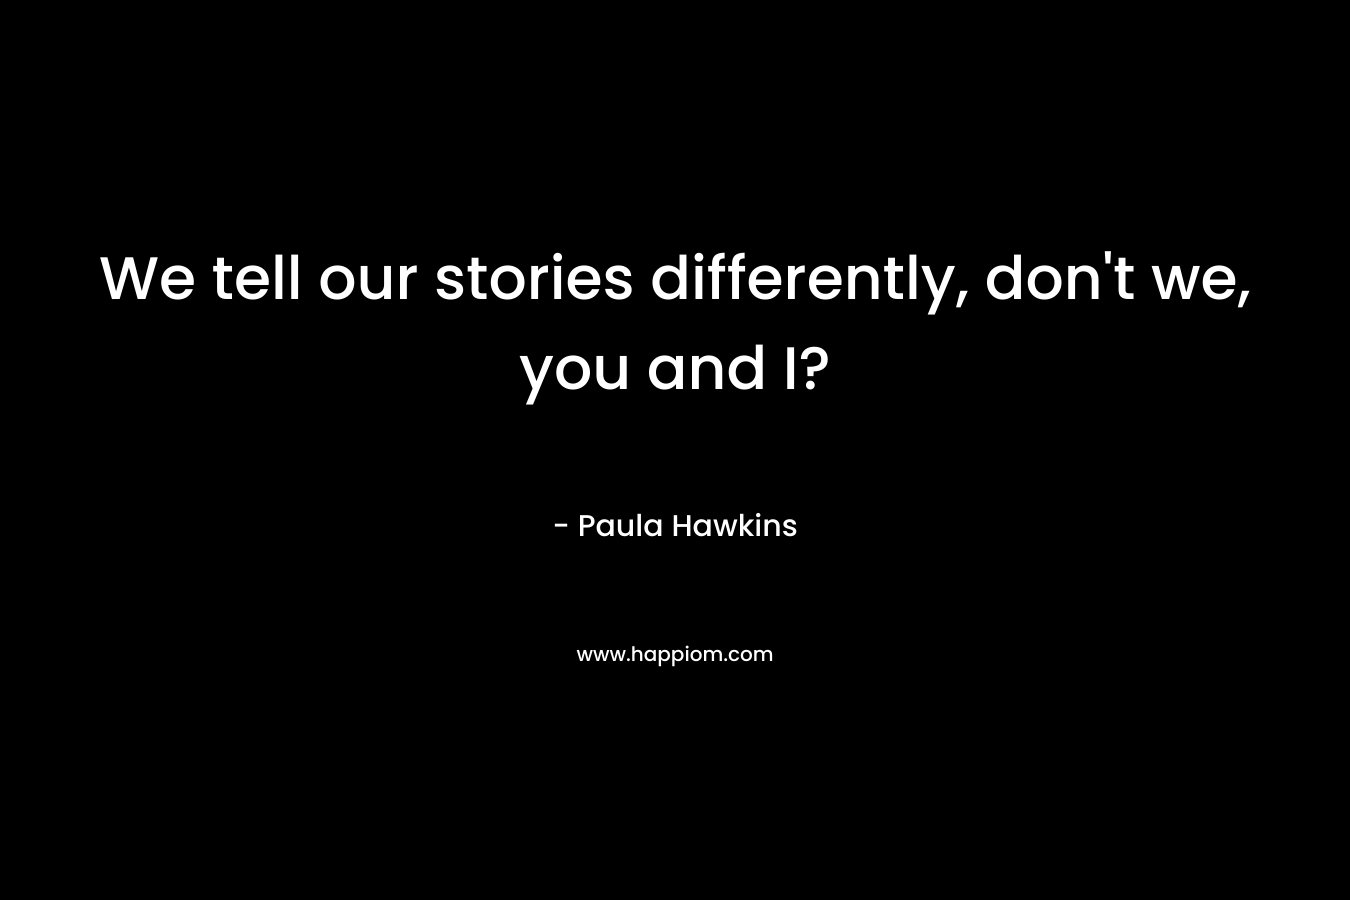 We tell our stories differently, don’t we, you and I? – Paula Hawkins